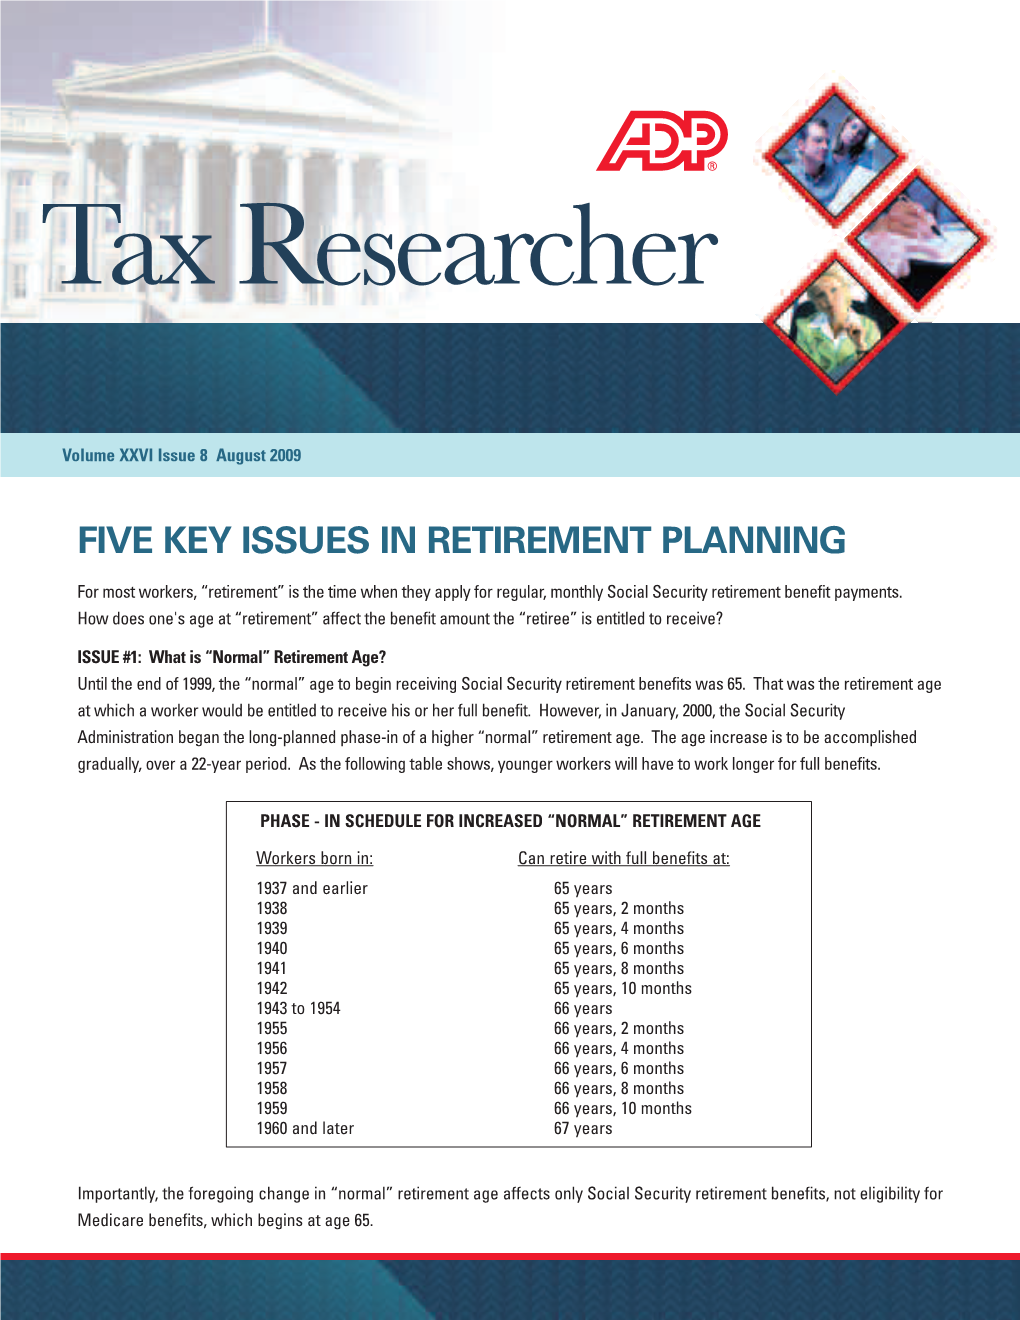 Five Key Issues in Retirement Planning